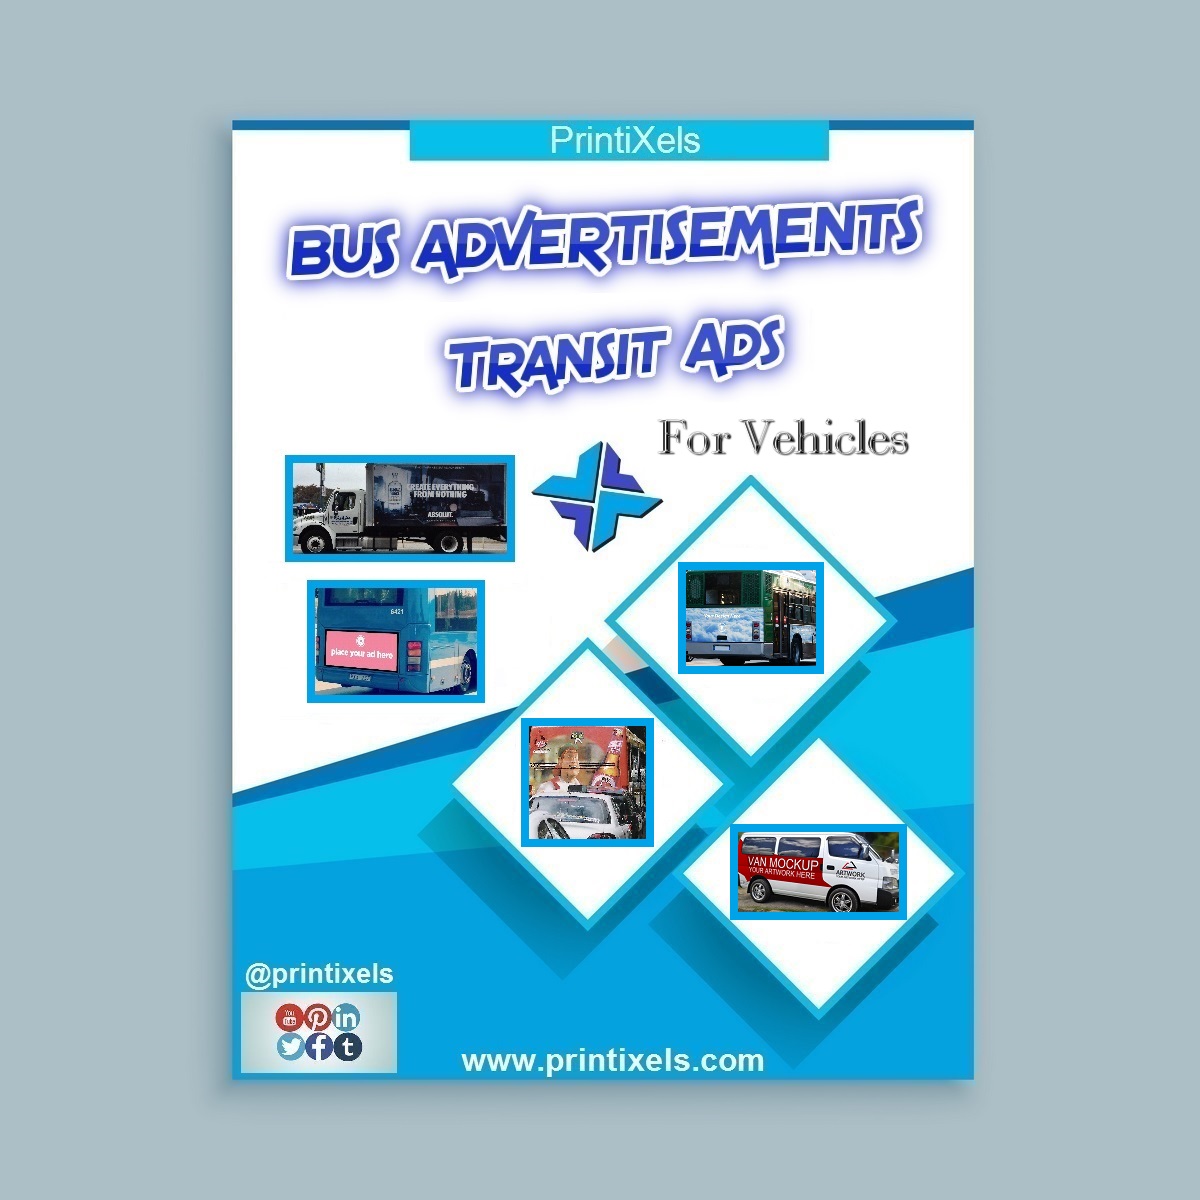 Bus Advertisements, Transit Ads for Vehicles - Printing & Installation